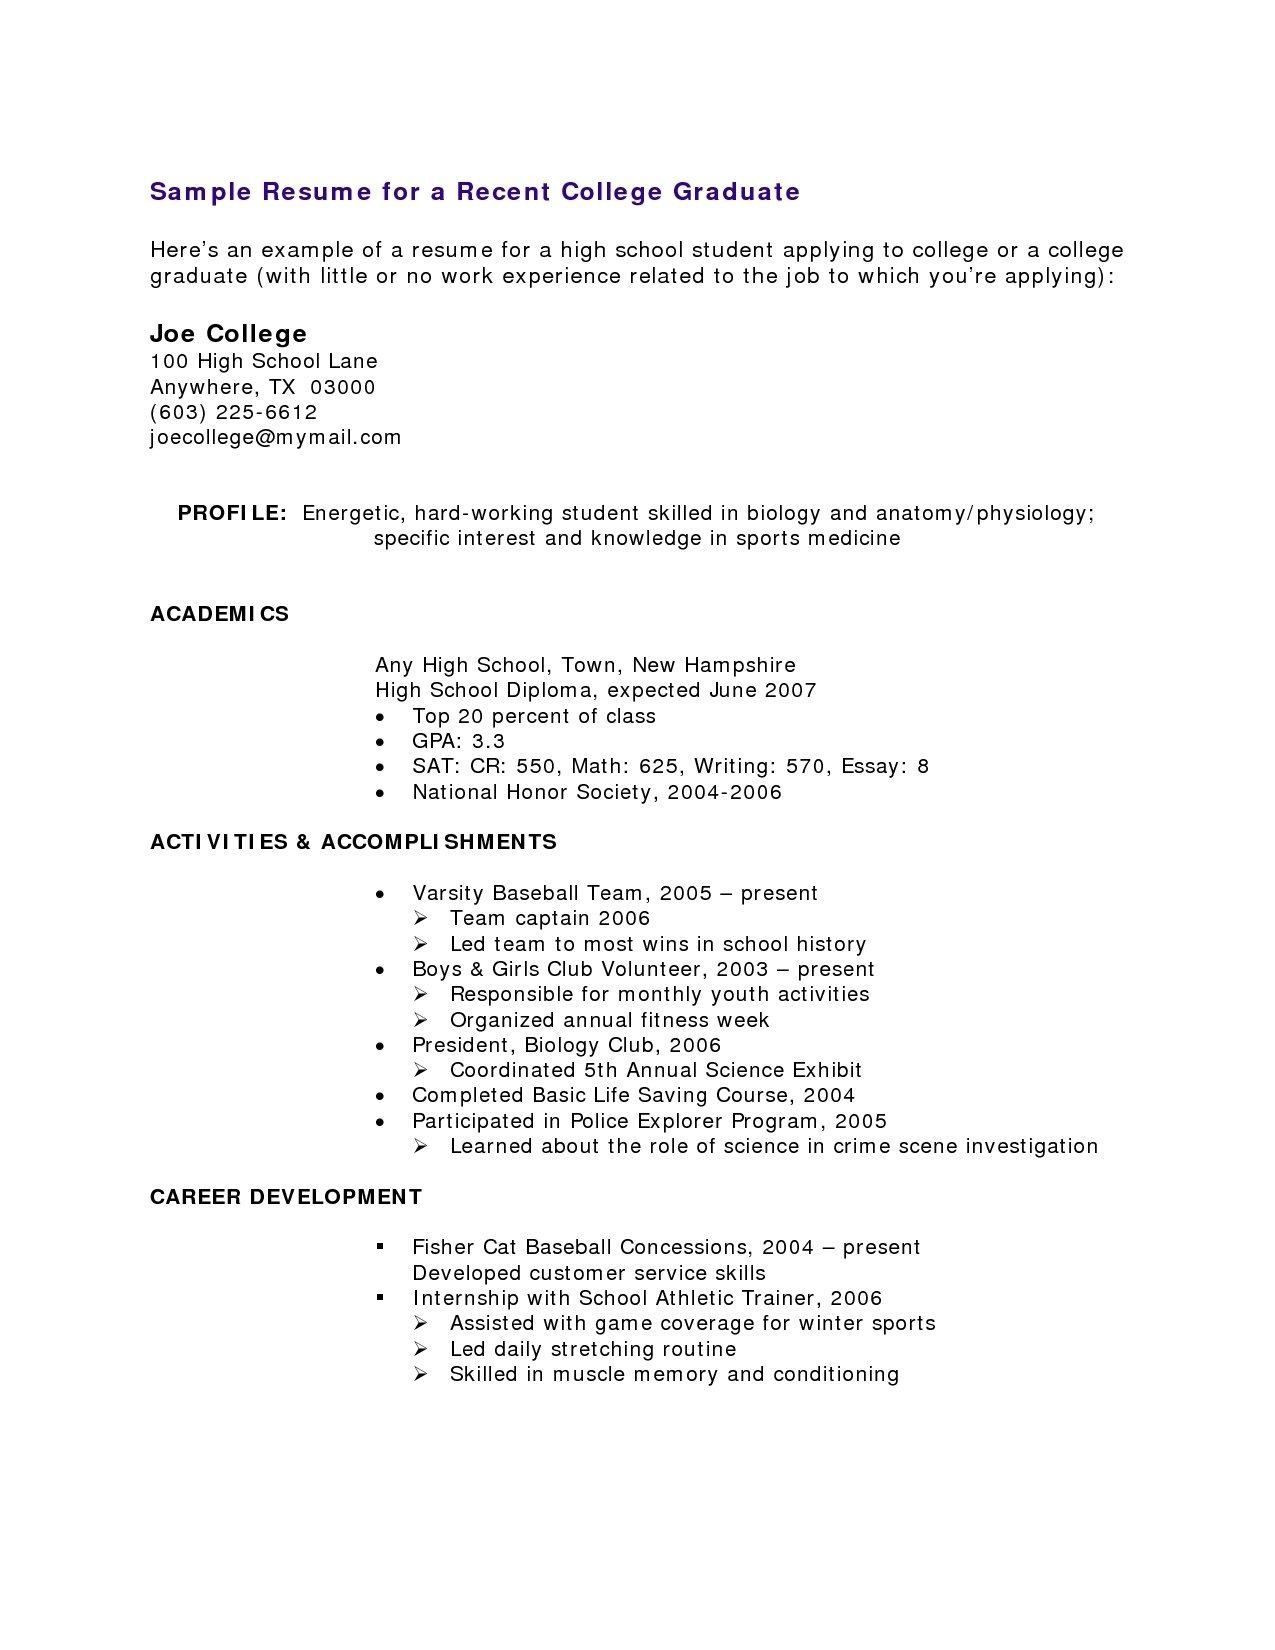 Sample Resume for someone with Little Experience Resume Examples Little Work Experience Resume Templates